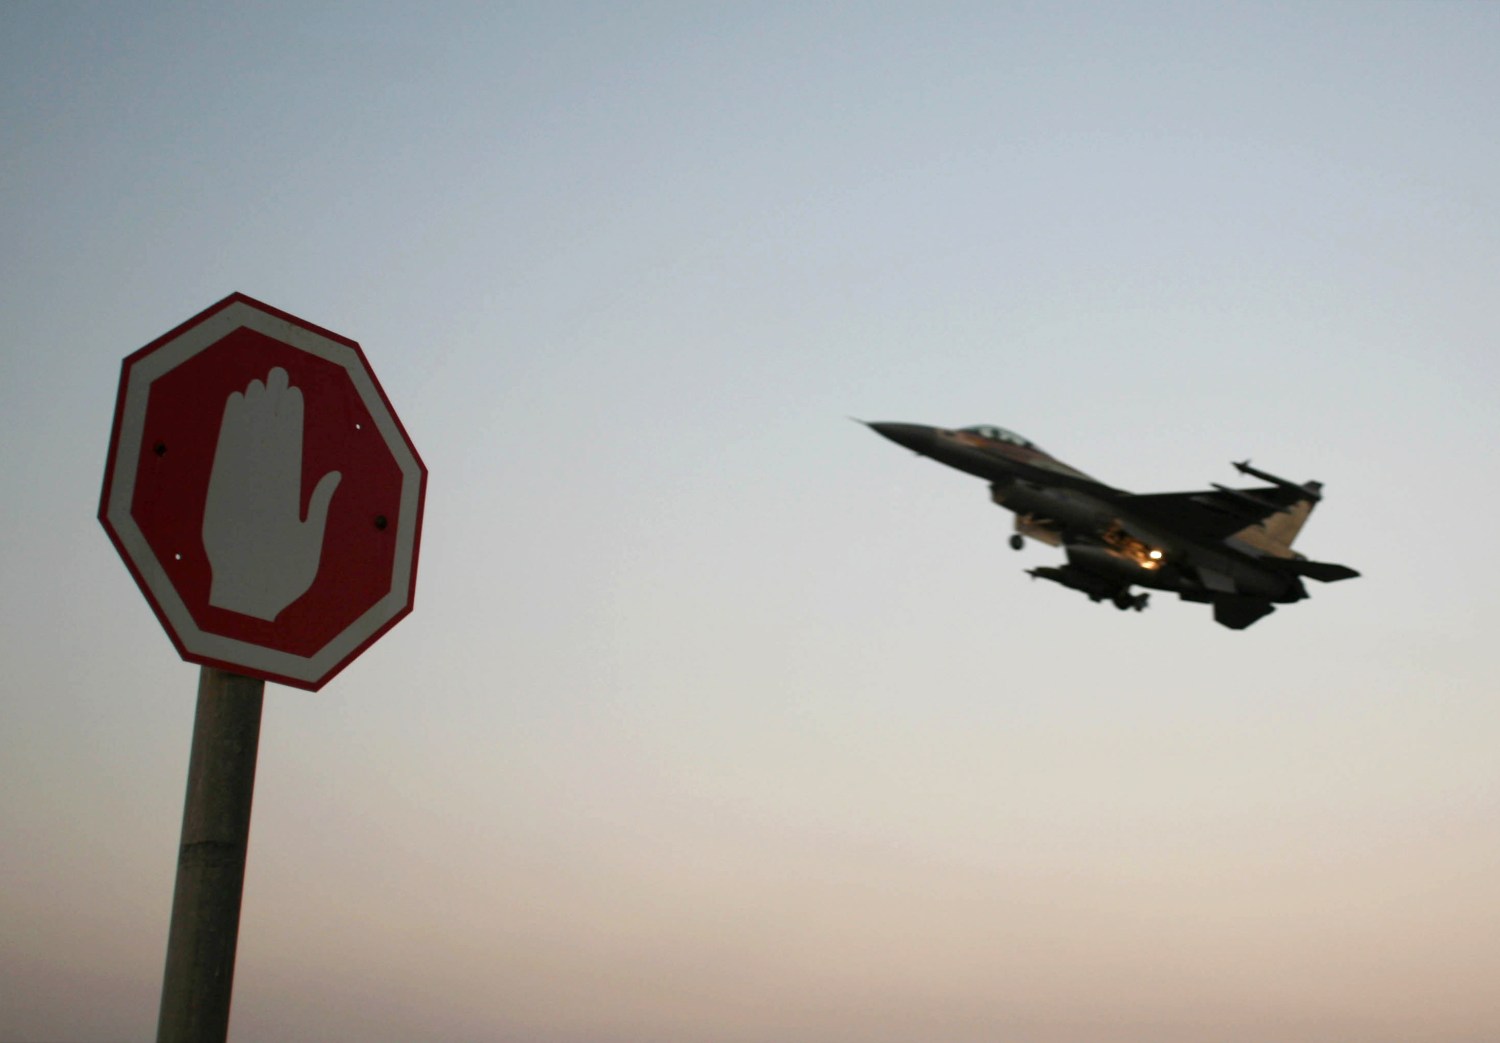 An Israeli Air Force F-16 fighter plane flying above a traffic sign after taking off for a mission in Lebanon from an Israeli Air Force Base in northern Israel in this July 20, 2006 file photo. Israeli warplanes bombed unidentified Syrian targets early on September 6, 2007, causing no damage or casualties, the official Syrian news agency said. Syrian air defences fired at the incoming planes, which crossed into Syria after midnight local time, the agency said. REUTERS/Ammar Awad/Files (ISRAEL) - GM1DWCBQYXAA